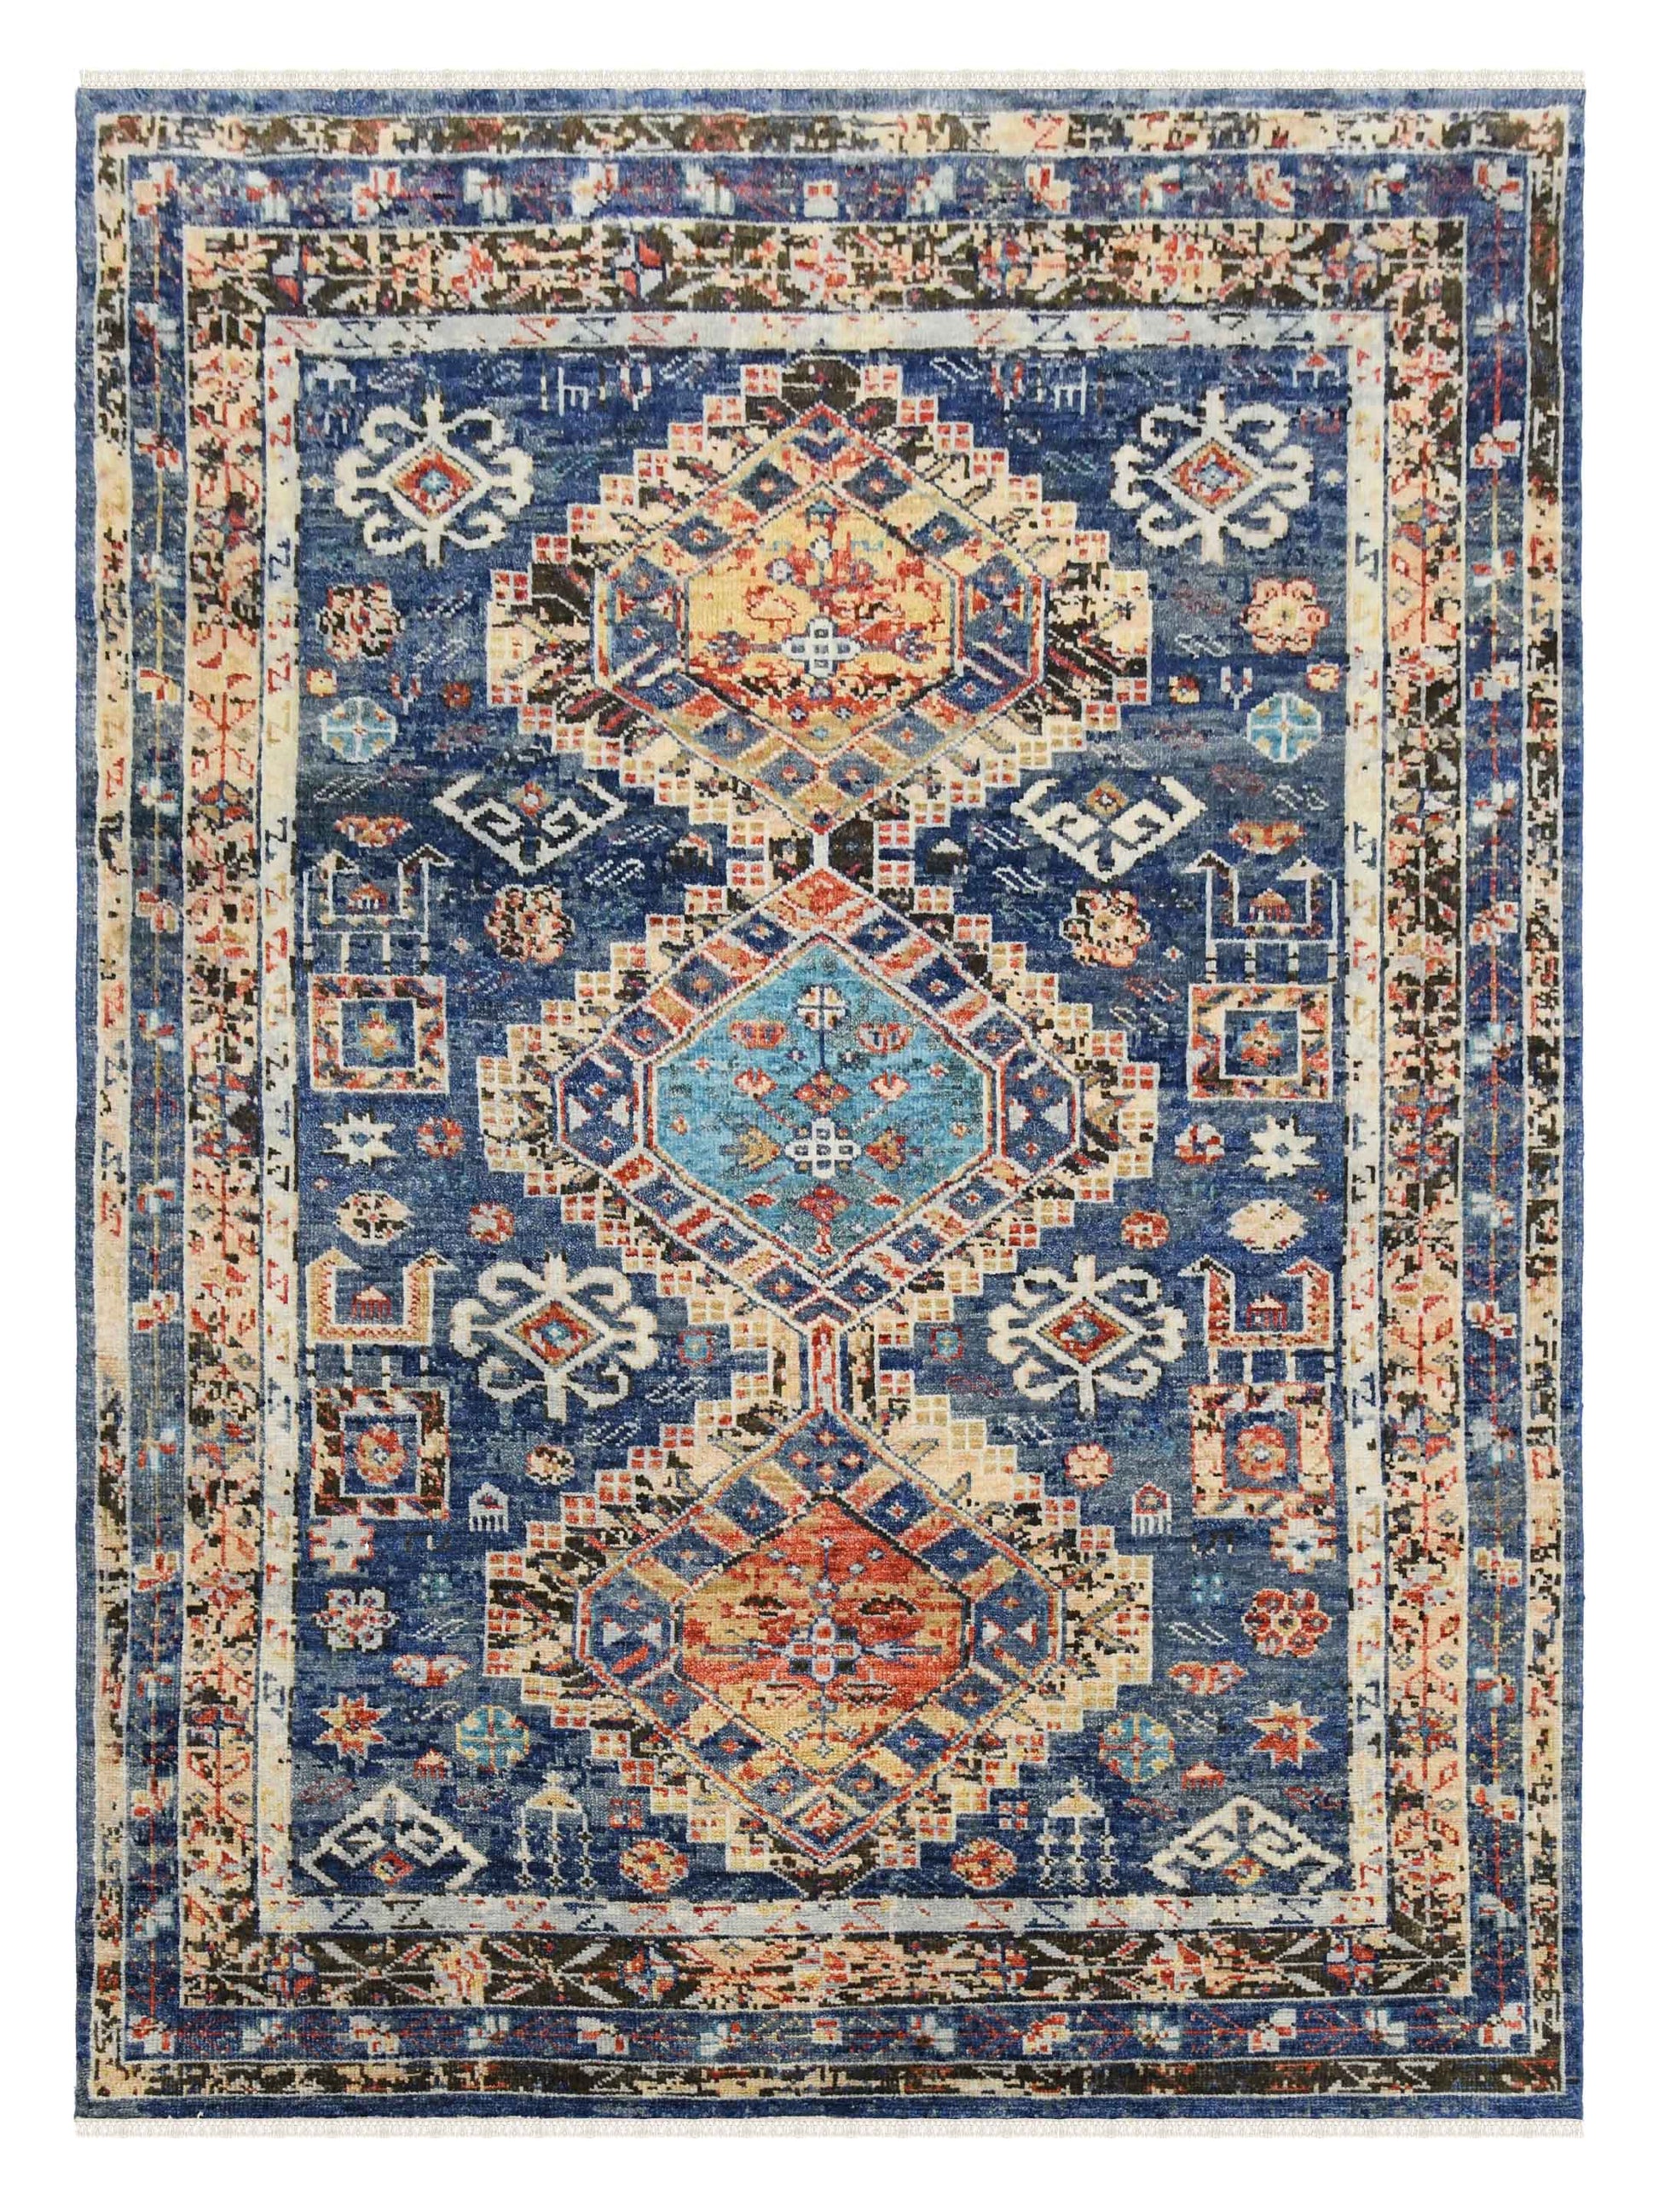 Limited Woodburn WOD-551 NAVY Traditional Knotted Rug